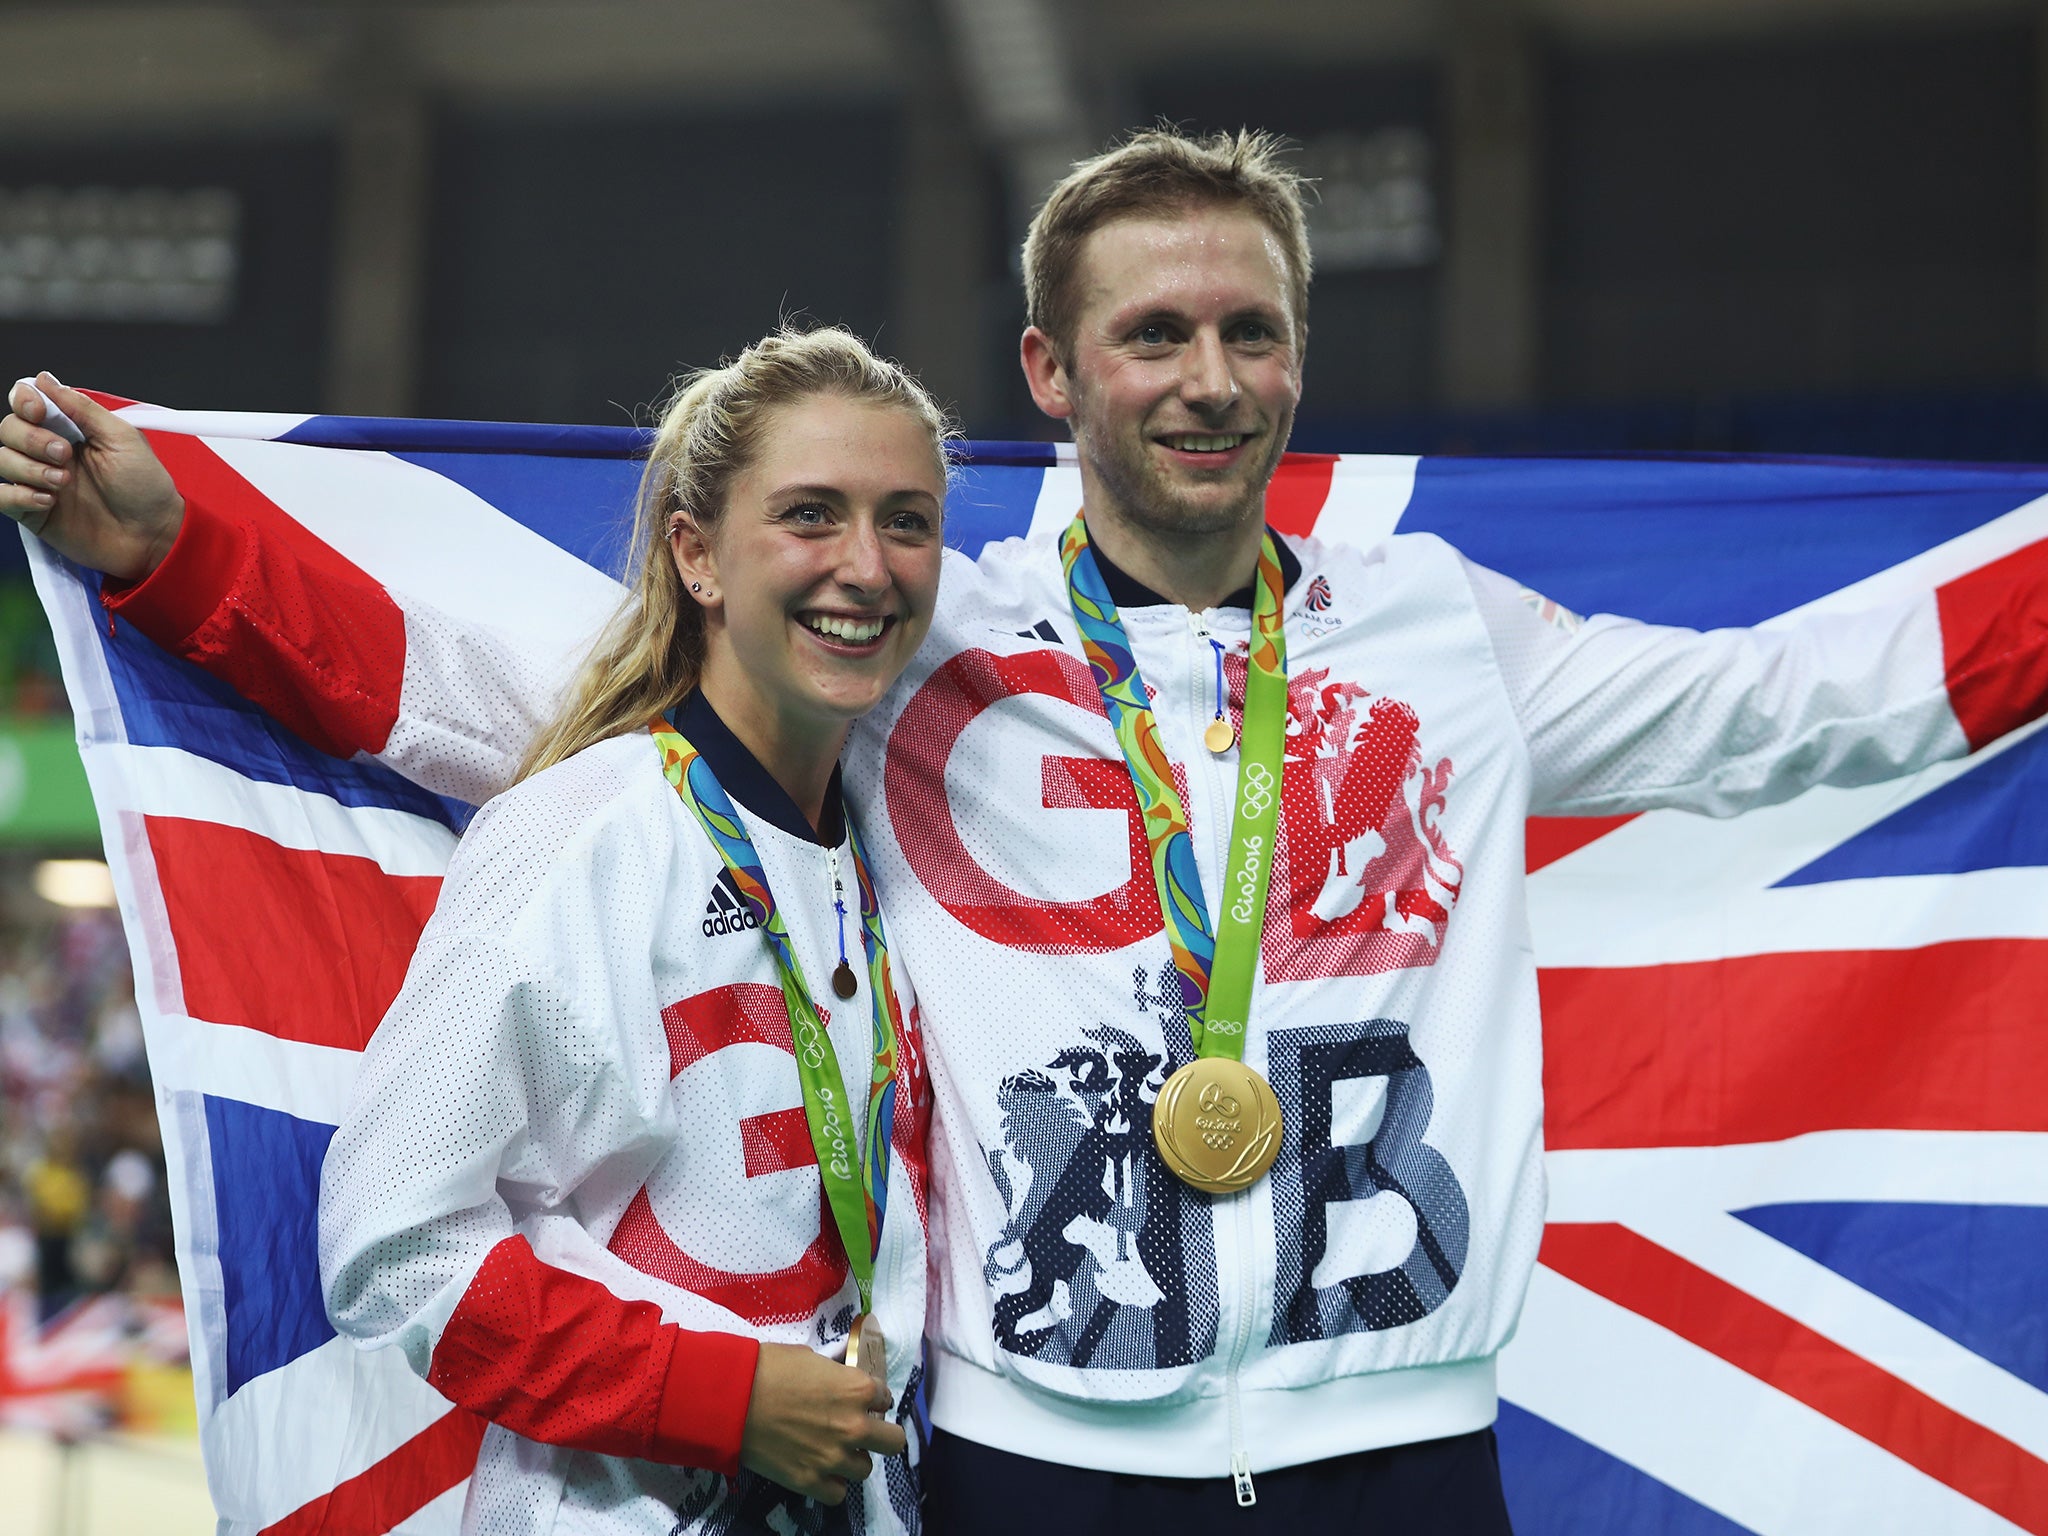 Trott and Kenny celebrate their achievements on a famous night for British cycling